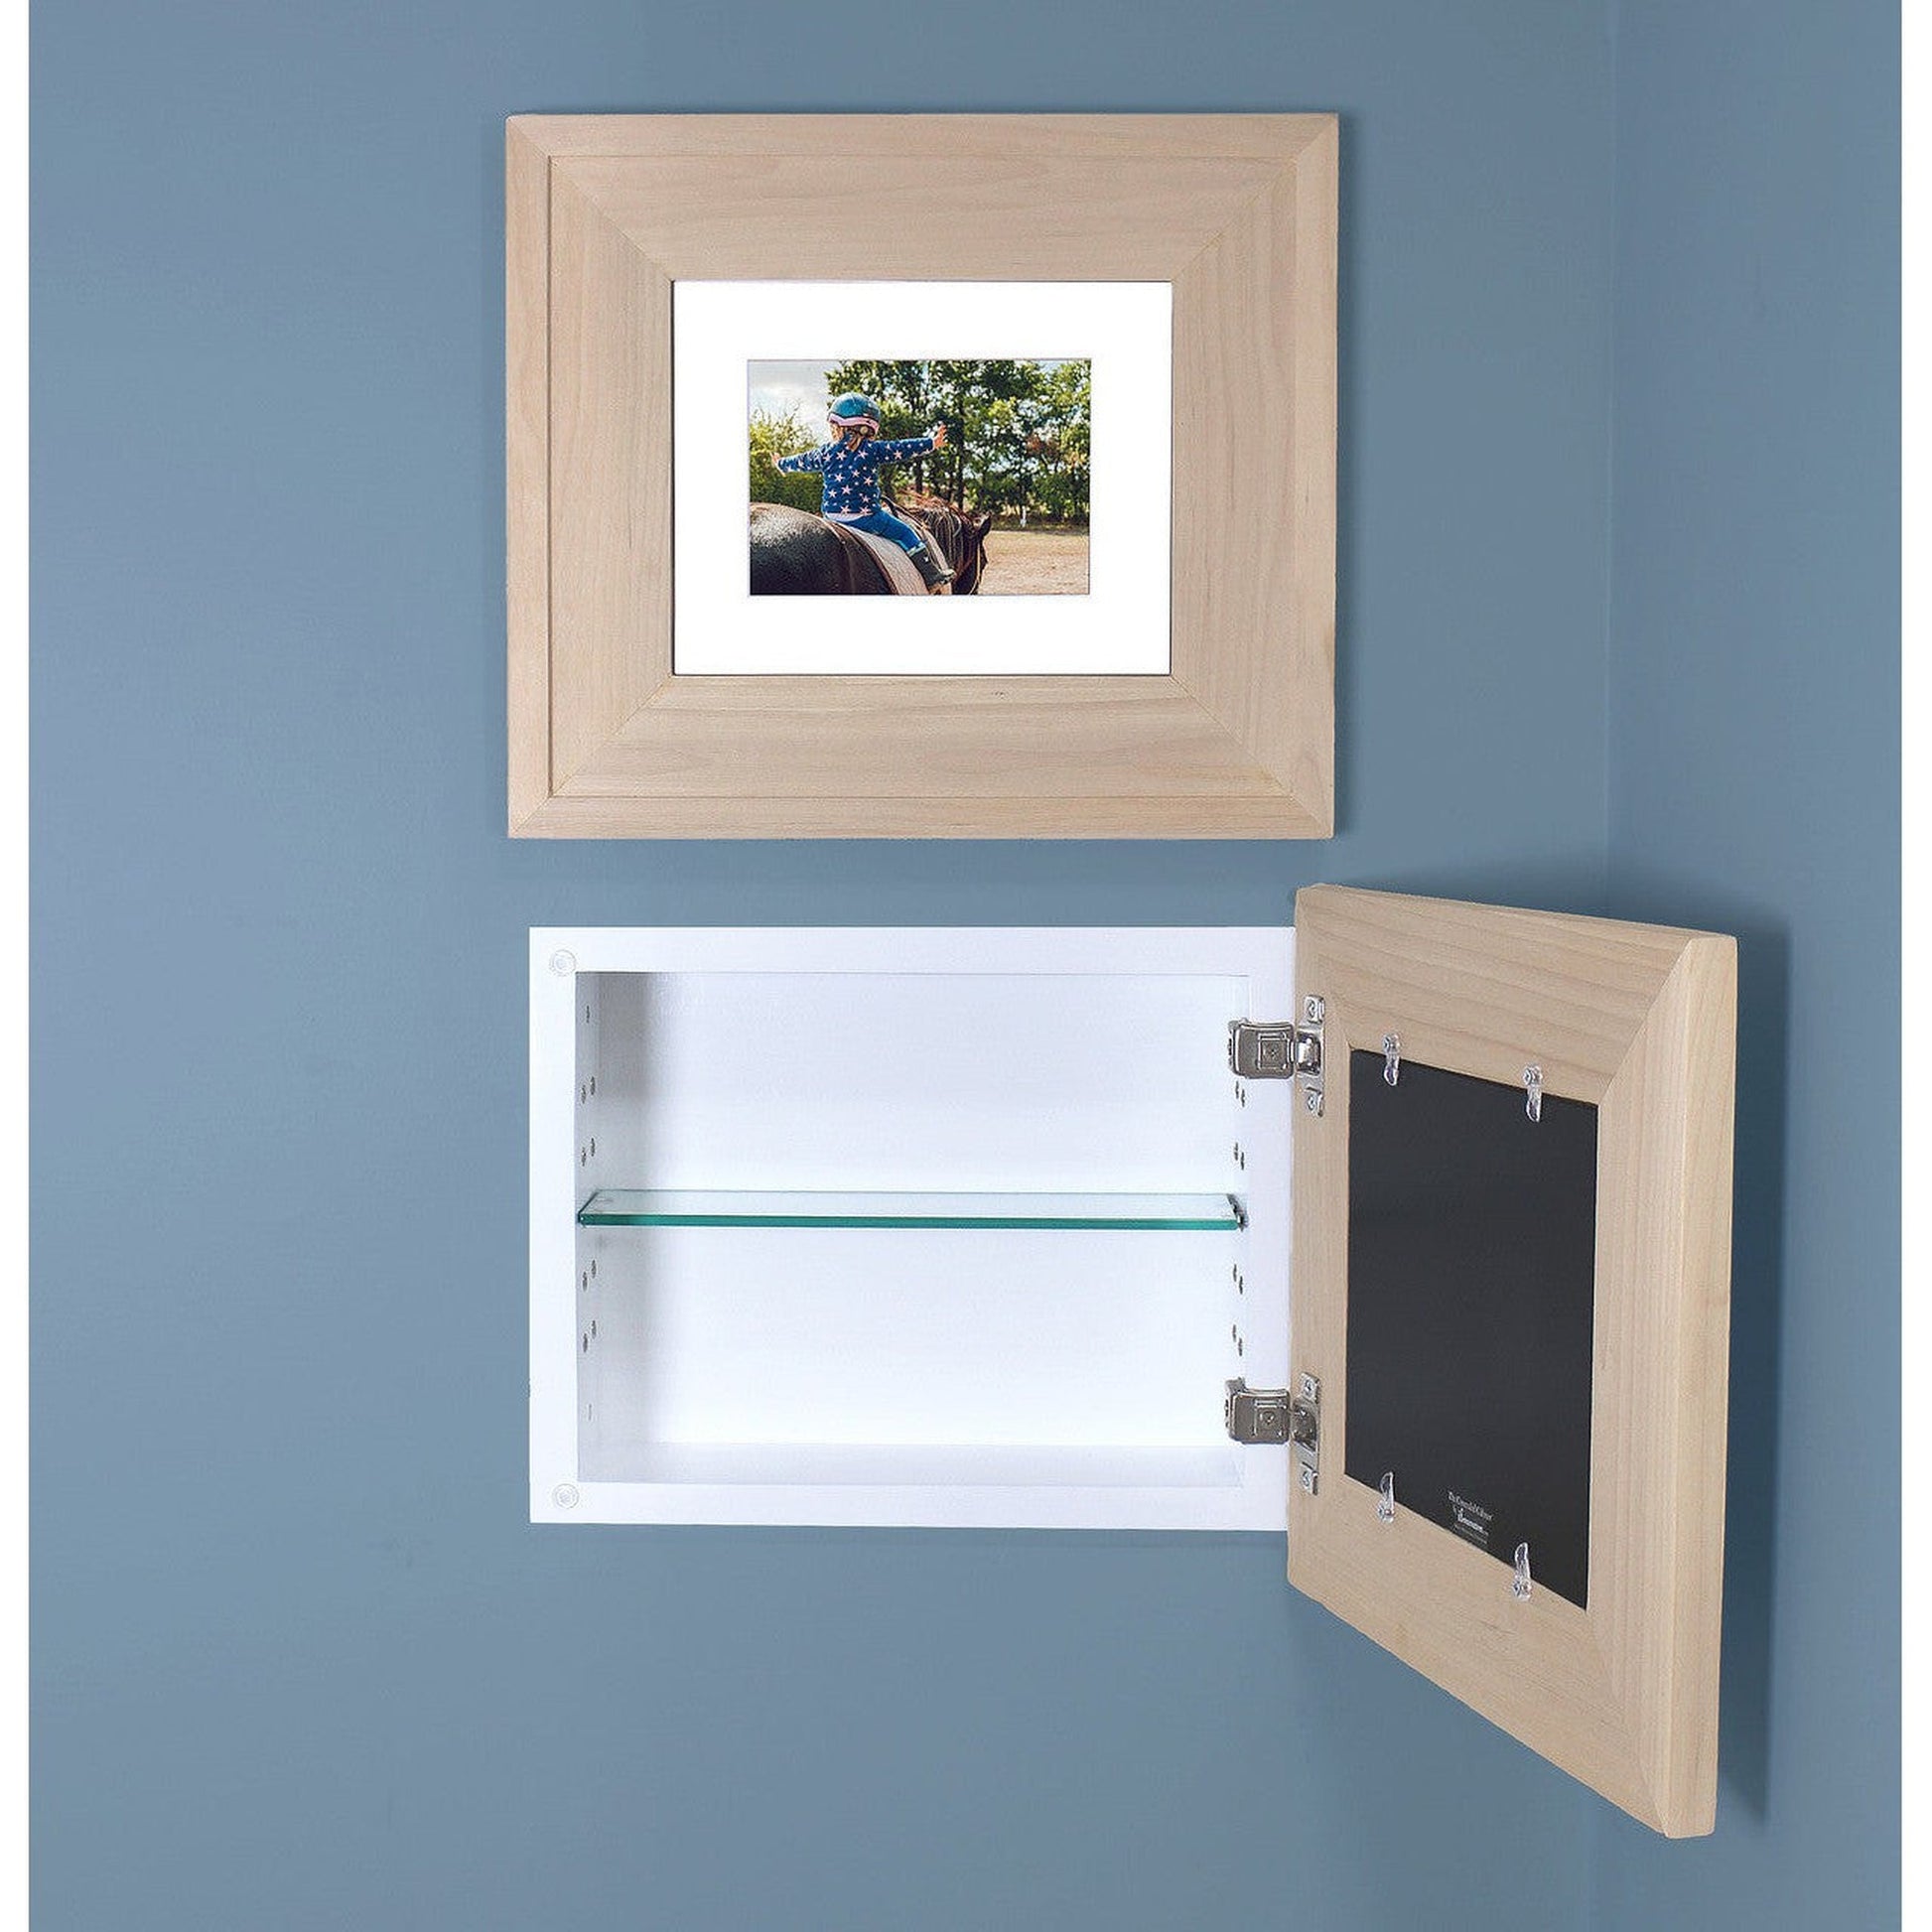 Fox Hollow Furnishings 14" x 11" Unfinished Raised Edge Compact Landscape Special 6" Depth Recessed Picture Frame Medicine Cabinet With Mirror and White Matting